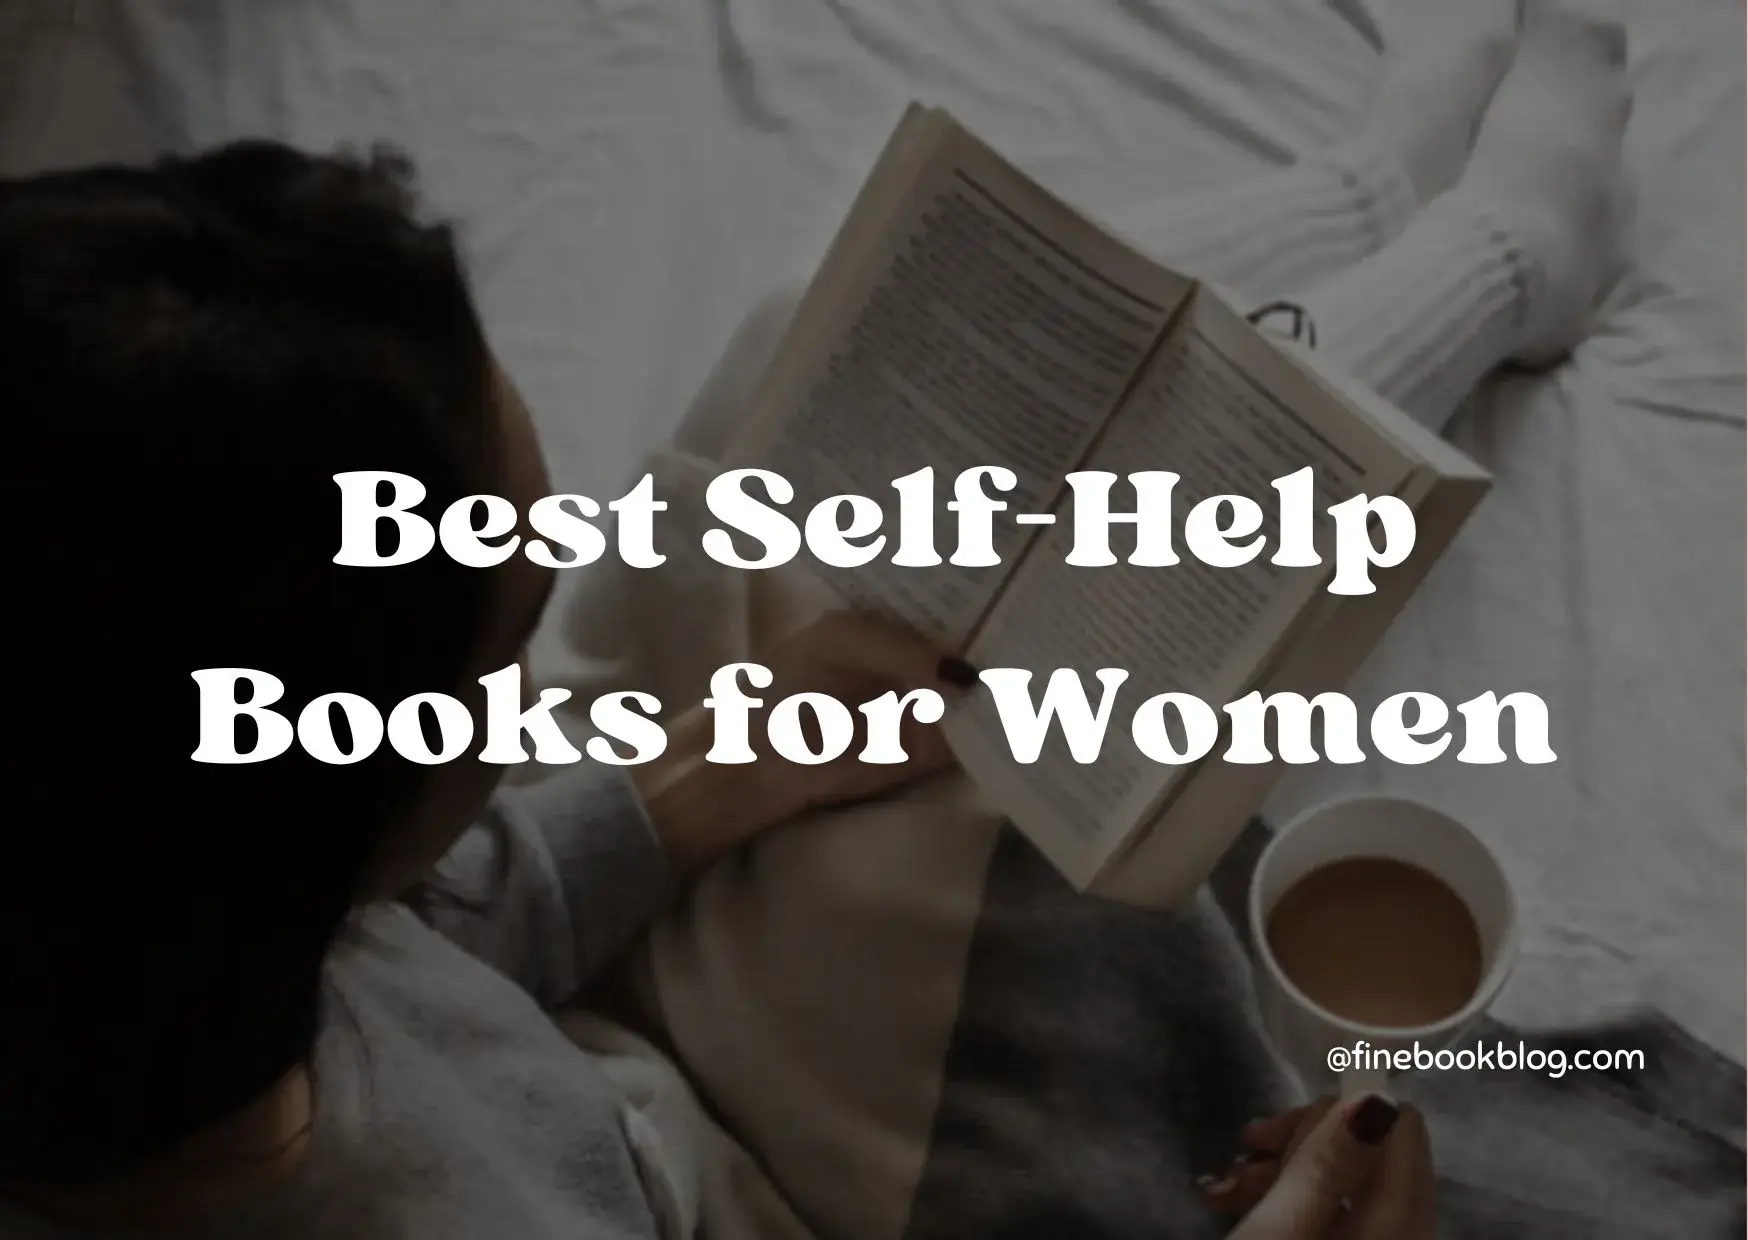 Self-help-books-for-women-recommends-non-fiction